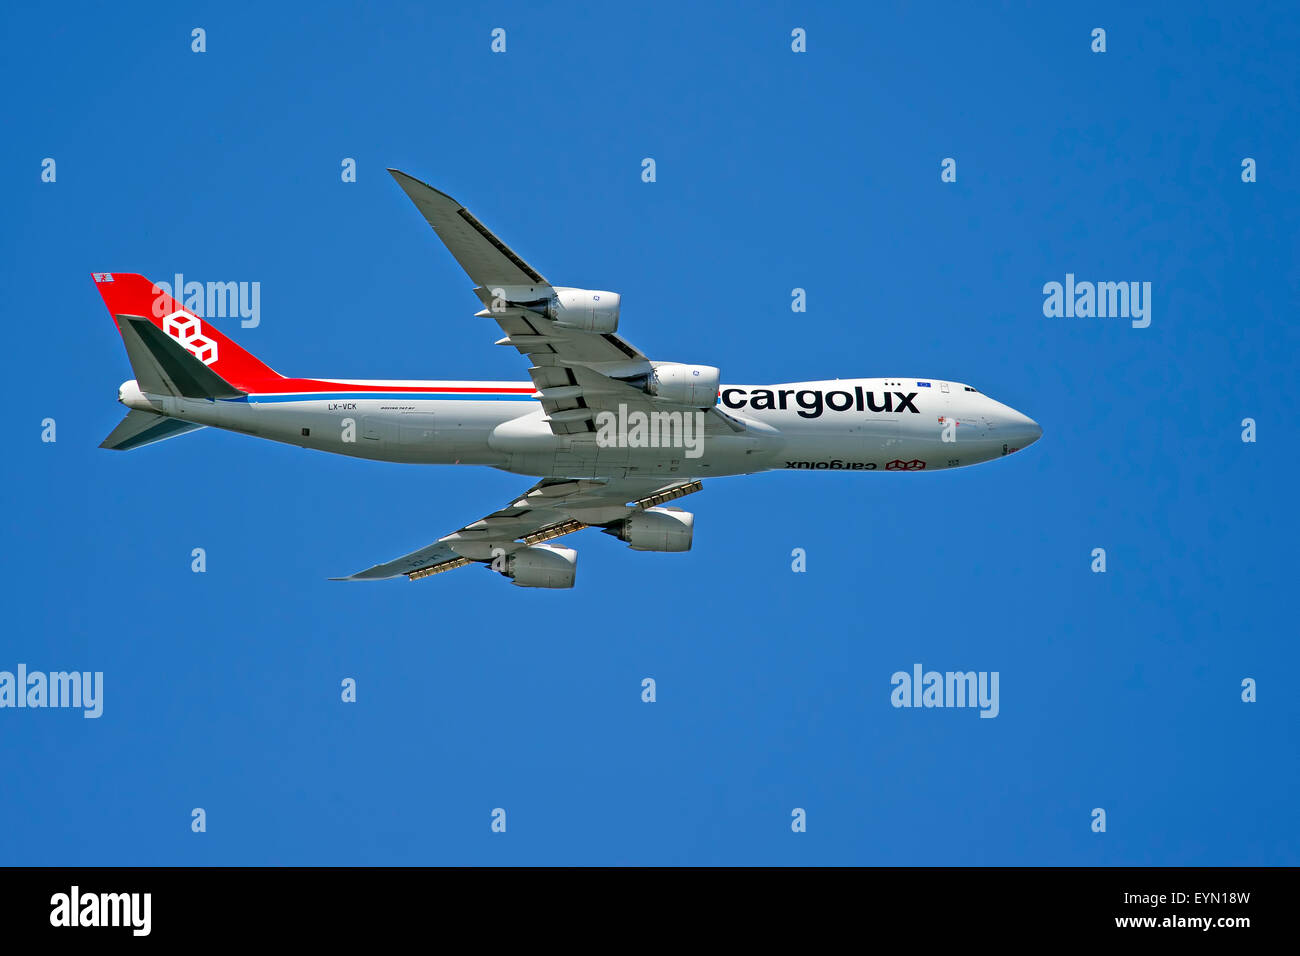 Cargolux Cargo Plane on Final Approach to JFK Airport in New York Stock Photo